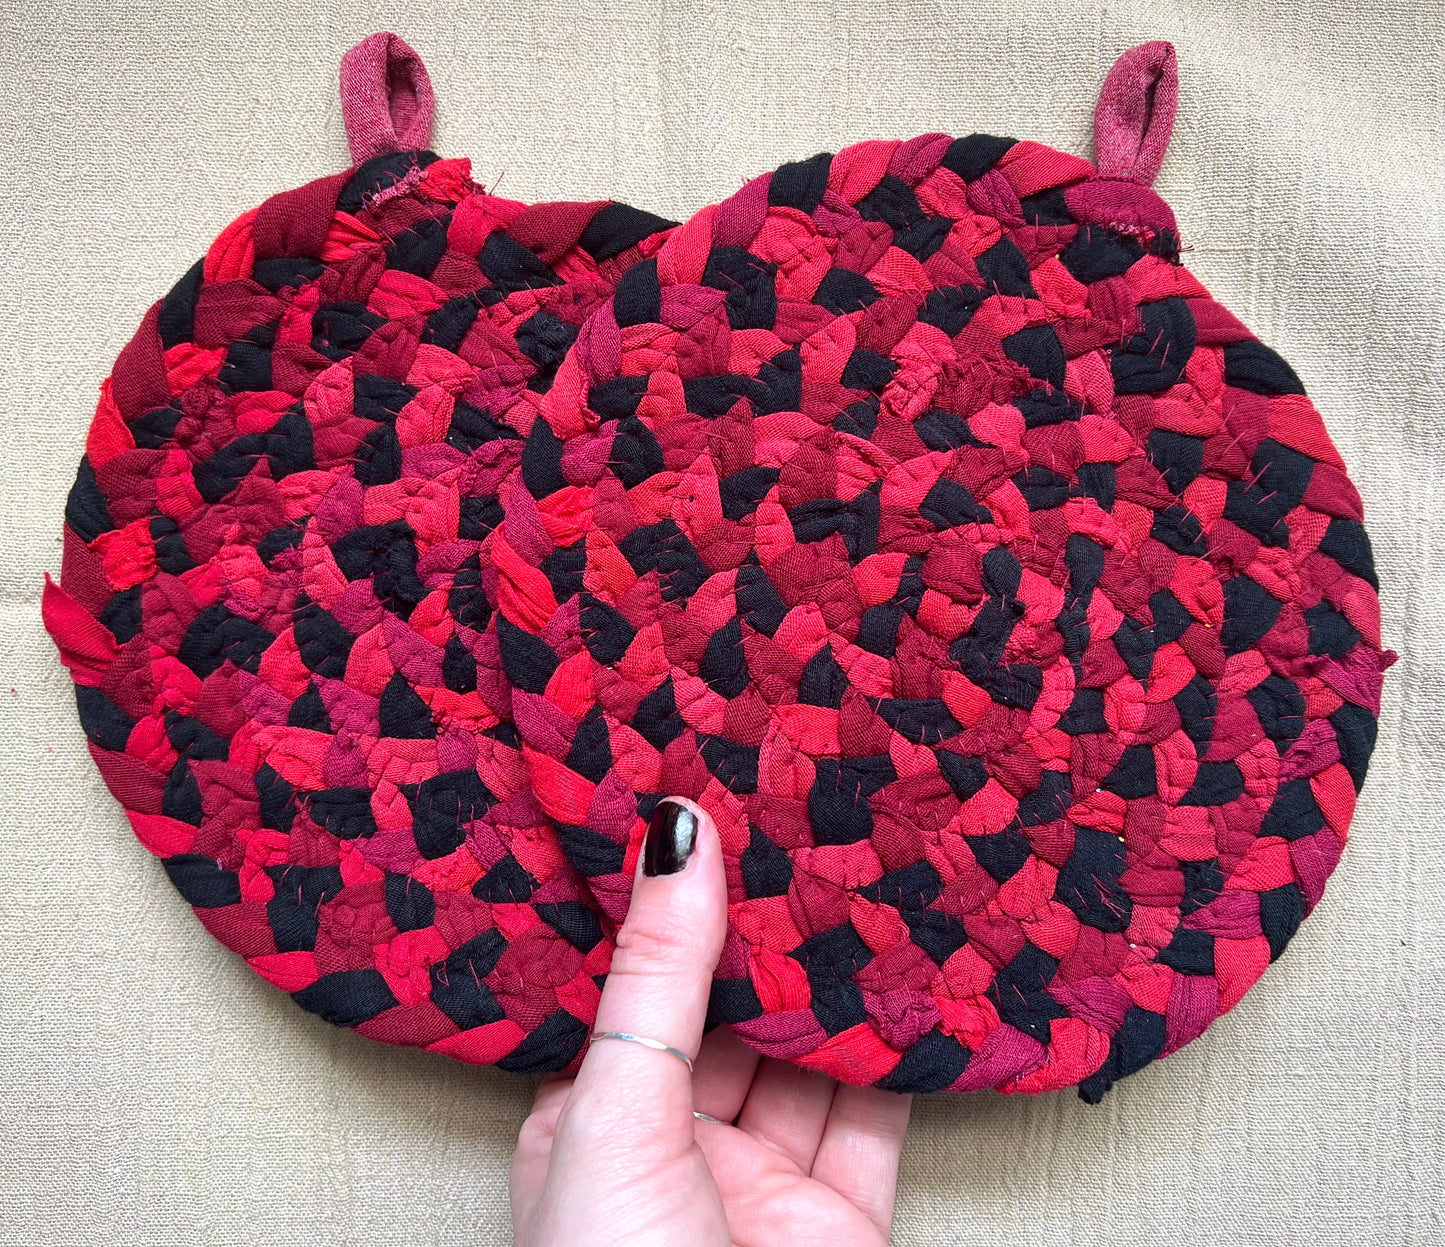 The back of two trivet potholders, to show off stitching, held against a linen surface.